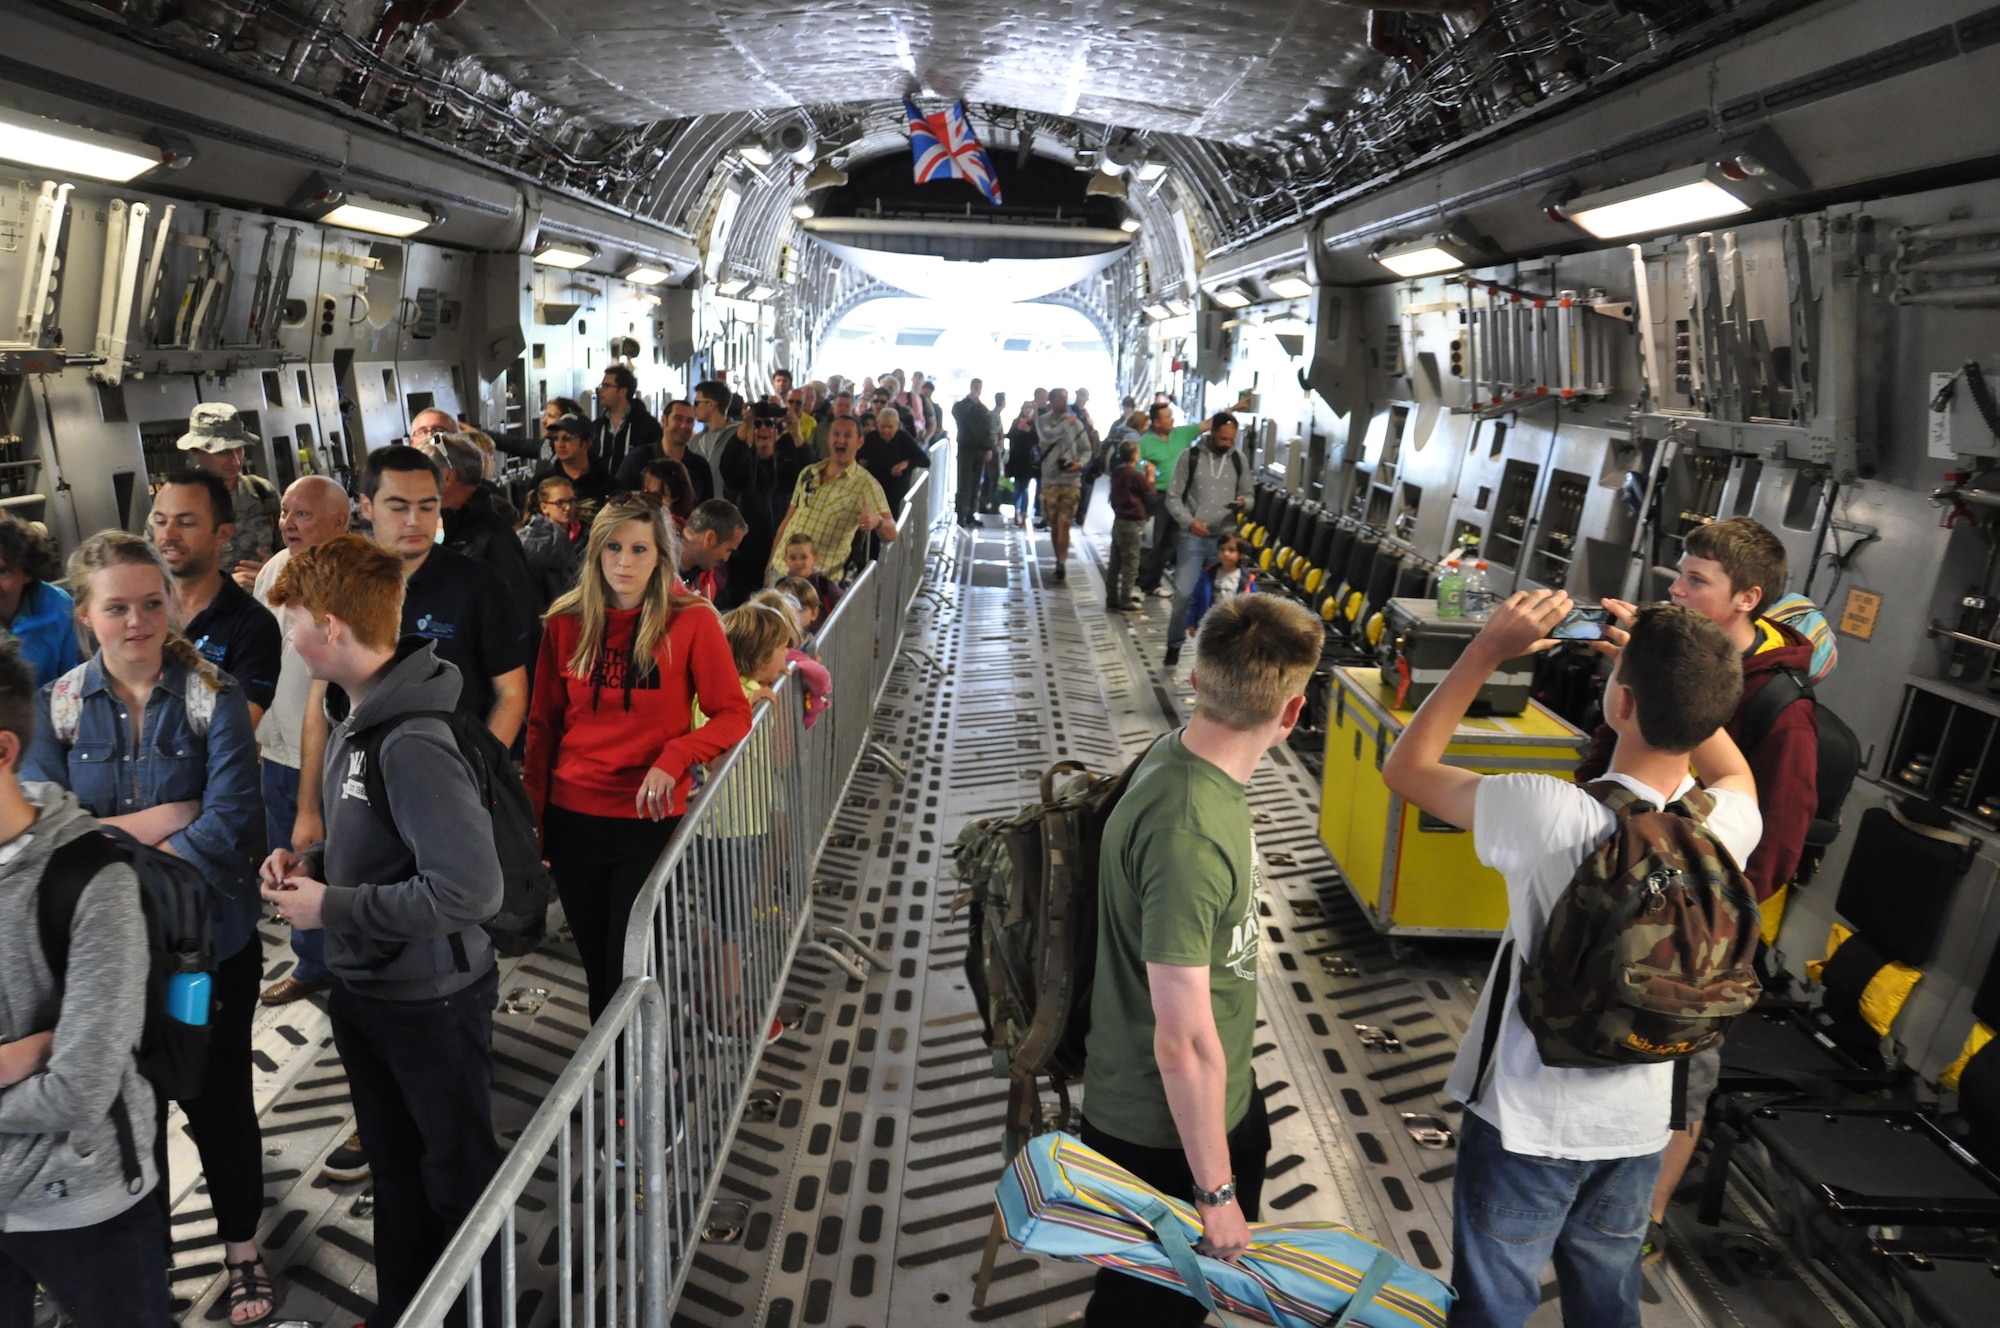 A Charleston C-17 Globemaster III and the 315th Airlift Wing's mini C-17 were popular attractions at the Yeovilton Air Day 2016 at Royal Naval Air Station Yeovilton, England July 2. Nearly 40,000 people crowded into the small British Navy base in order to get peek at aircraft from all over the world. Reservists from the 315th Airlift Wing, participated in the annual air show while also bringing home the show’s top prize, the best static display award. (U.S. Air Force photo by Maj. Wayne Capps)